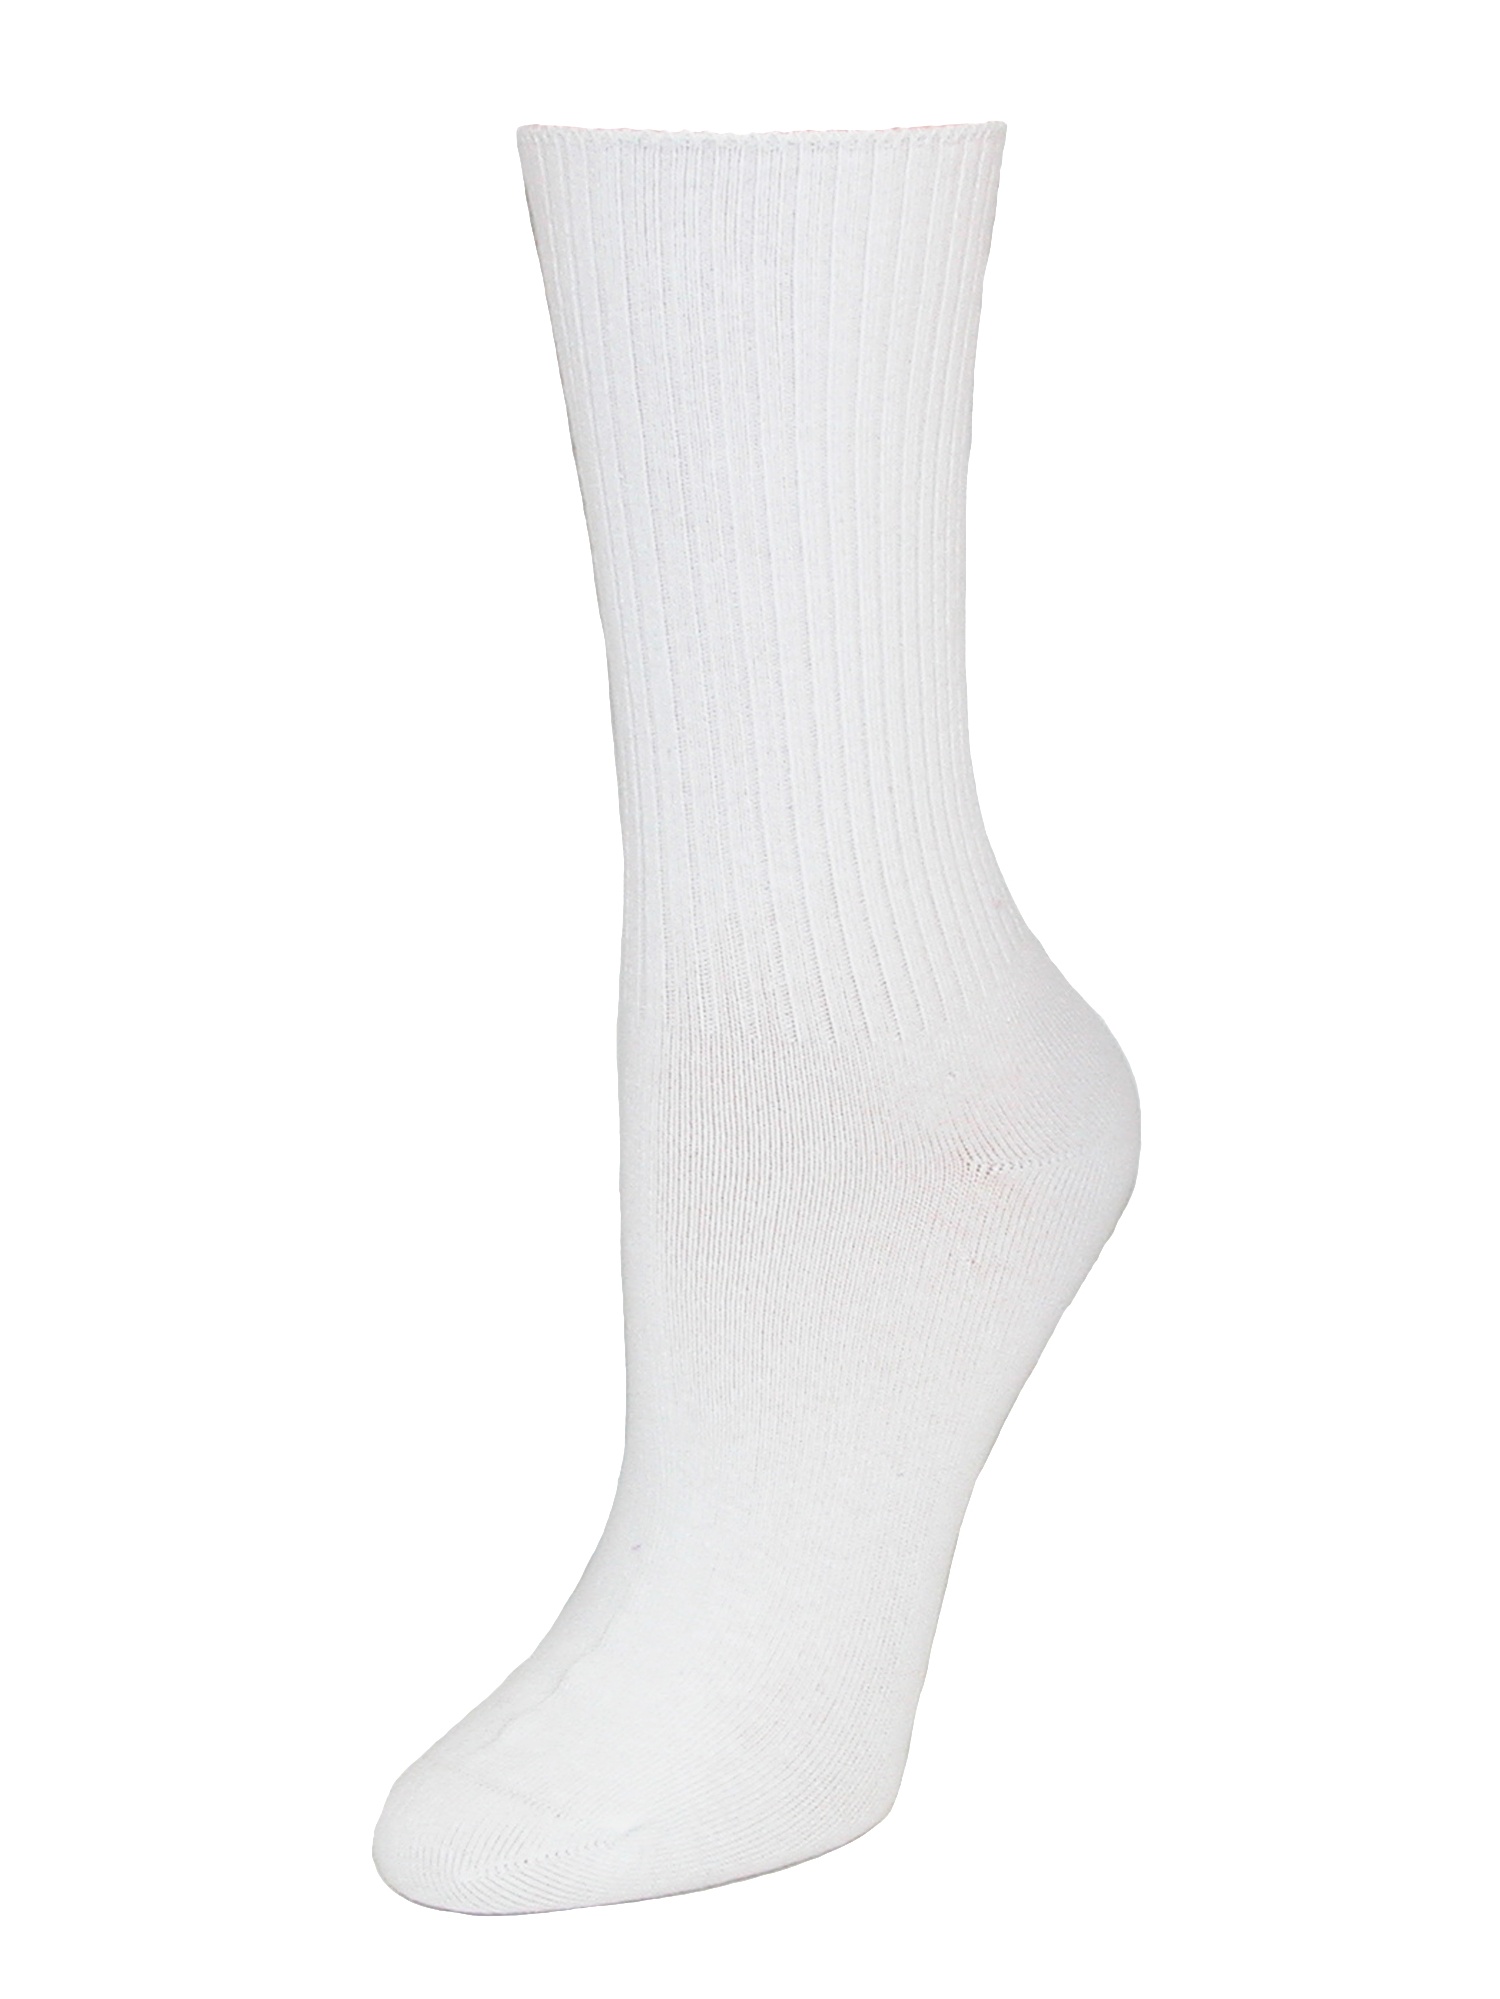 Kids' Cotton Seamless Toe Casual Crew Sock (Pack of 3) - image 2 of 3